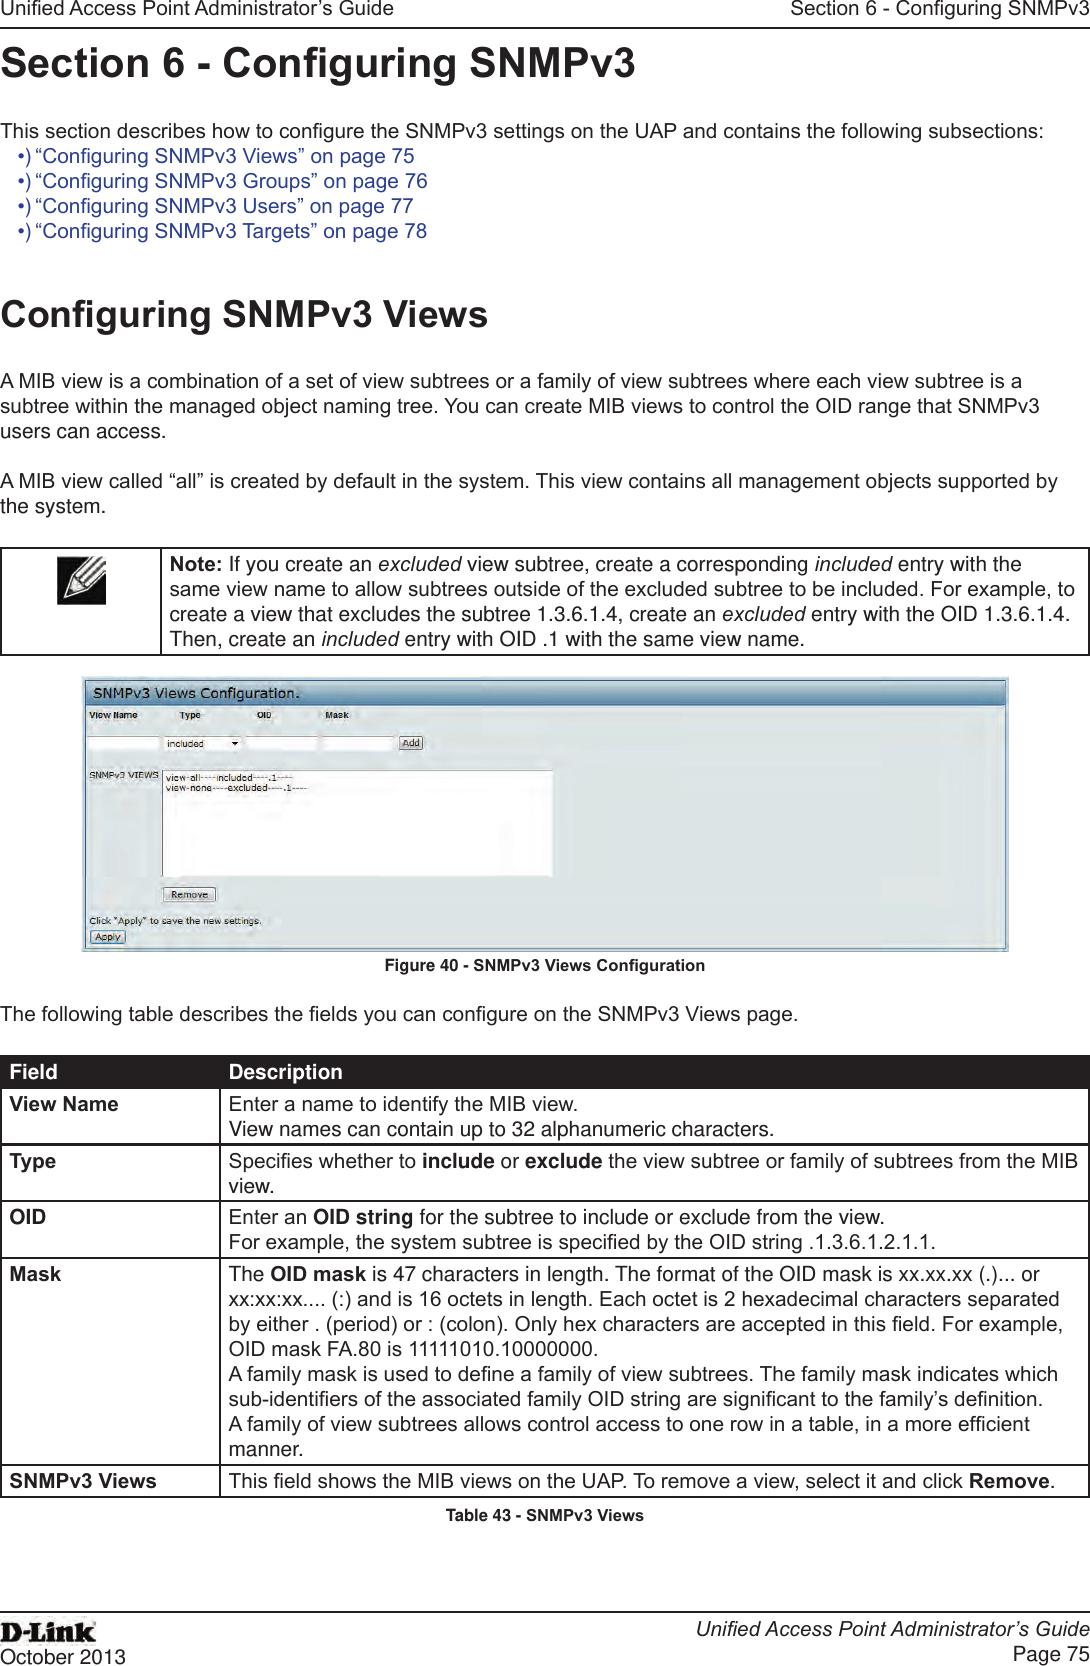 Unied Access Point Administrator’s GuideUnied Access Point Administrator’s GuidePage 75October 2013Section 6 - Conguring SNMPv3Section 6 - Conguring SNMPv3This section describes how to congure the SNMPv3 settings on the UAP and contains the following subsections:•) “Conguring SNMPv3 Views” on page 75•) “Conguring SNMPv3 Groups” on page 76•) “Conguring SNMPv3 Users” on page 77•) “Conguring SNMPv3 Targets” on page 78Conguring SNMPv3 ViewsA MIB view is a combination of a set of view subtrees or a family of view subtrees where each view subtree is a subtree within the managed object naming tree. You can create MIB views to control the OID range that SNMPv3 users can access.A MIB view called “all” is created by default in the system. This view contains all management objects supported by the system.Note: If you create an excluded view subtree, create a corresponding included entry with the same view name to allow subtrees outside of the excluded subtree to be included. For example, to create a view that excludes the subtree 1.3.6.1.4, create an excluded entry with the OID 1.3.6.1.4. Then, create an included entry with OID .1 with the same view name. Figure 40 - SNMPv3 Views CongurationThe following table describes the elds you can congure on the SNMPv3 Views page.Field DescriptionView Name Enter a name to identify the MIB view. View names can contain up to 32 alphanumeric characters.Type Species whether to include or exclude the view subtree or family of subtrees from the MIB view.OID Enter an OID string for the subtree to include or exclude from the view. For example, the system subtree is specied by the OID string .1.3.6.1.2.1.1.Mask The OID mask is 47 characters in length. The format of the OID mask is xx.xx.xx (.)... or xx:xx:xx.... (:) and is 16 octets in length. Each octet is 2 hexadecimal characters separated by either . (period) or : (colon). Only hex characters are accepted in this eld. For example, OID mask FA.80 is 11111010.10000000.A family mask is used to dene a family of view subtrees. The family mask indicates which sub-identiers of the associated family OID string are signicant to the family’s denition. A family of view subtrees allows control access to one row in a table, in a more efcient manner.SNMPv3 Views This eld shows the MIB views on the UAP. To remove a view, select it and click Remove.Table 43 - SNMPv3 Views